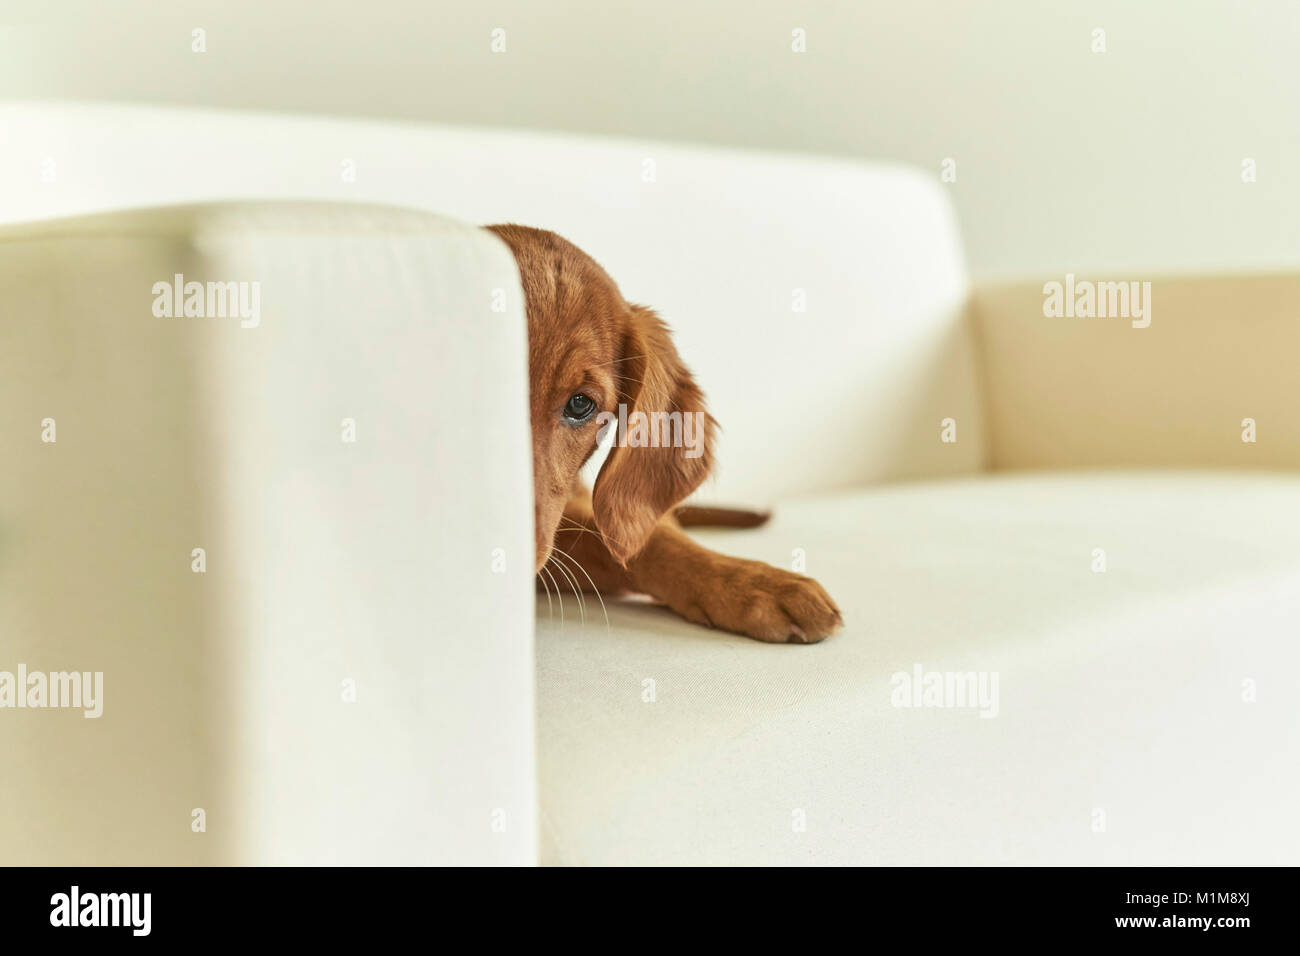 Golden Retriever. Puppy lying on a couch. Germany. Stock Photo